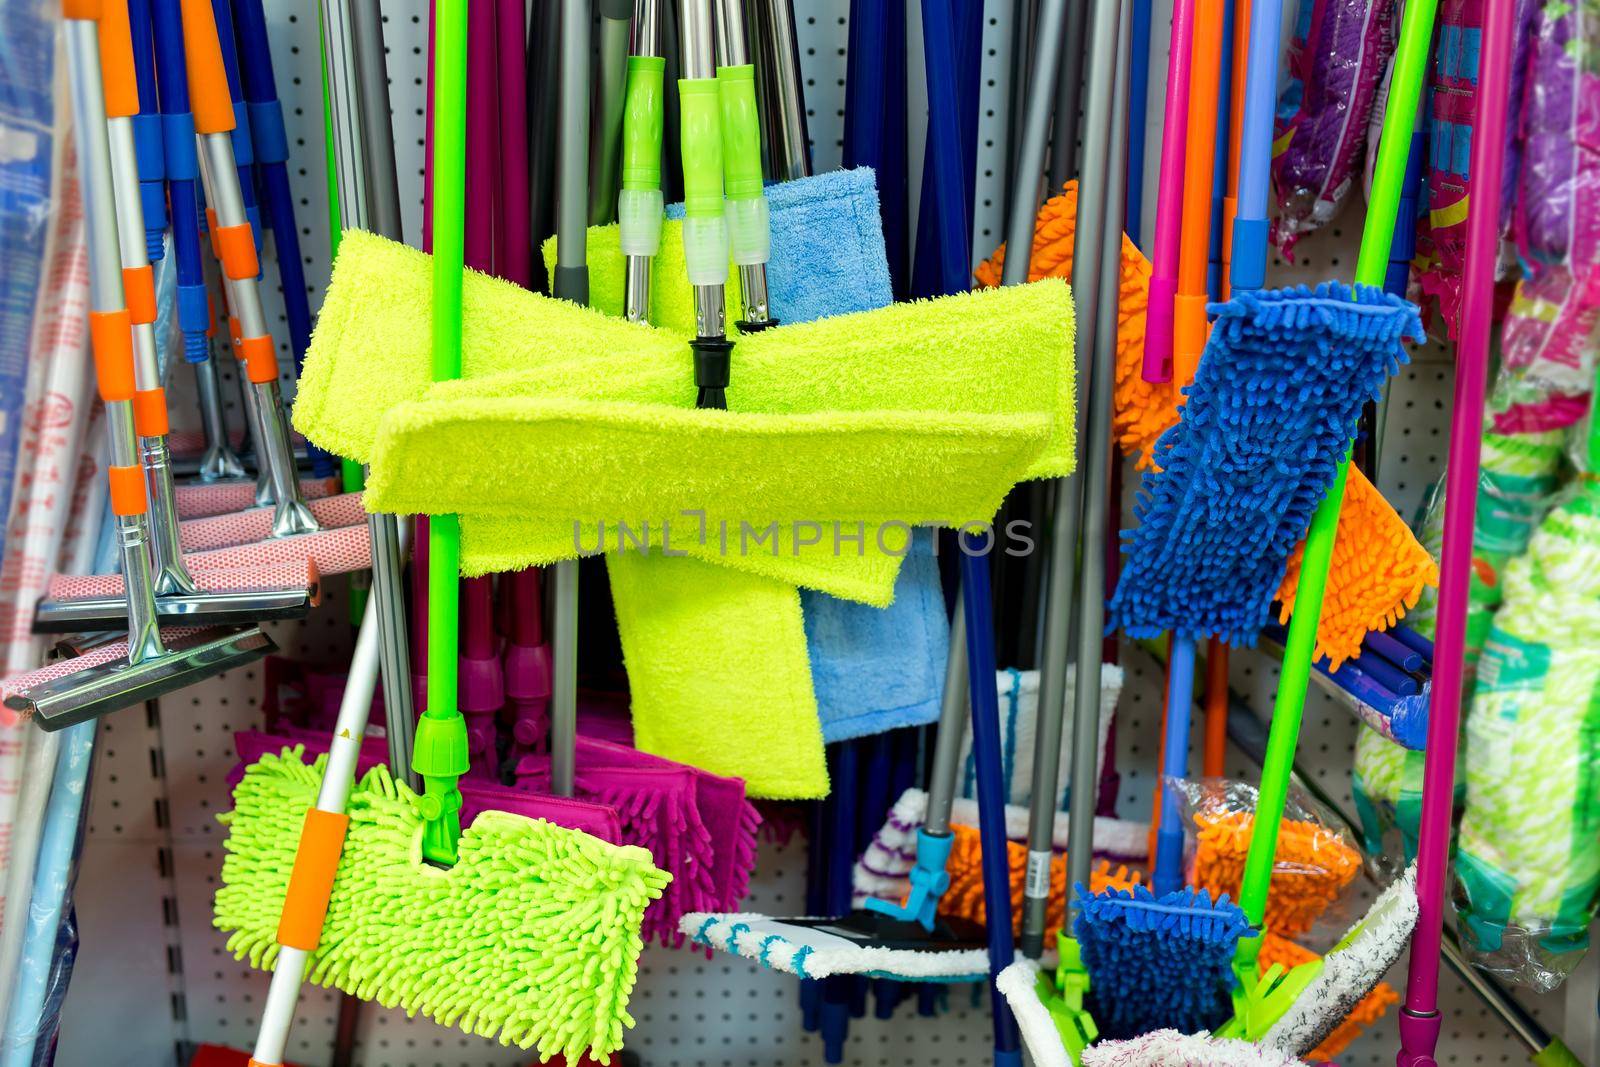 Lots of sponges, rags and mops on shelves in the supermarket. by StudioPeace